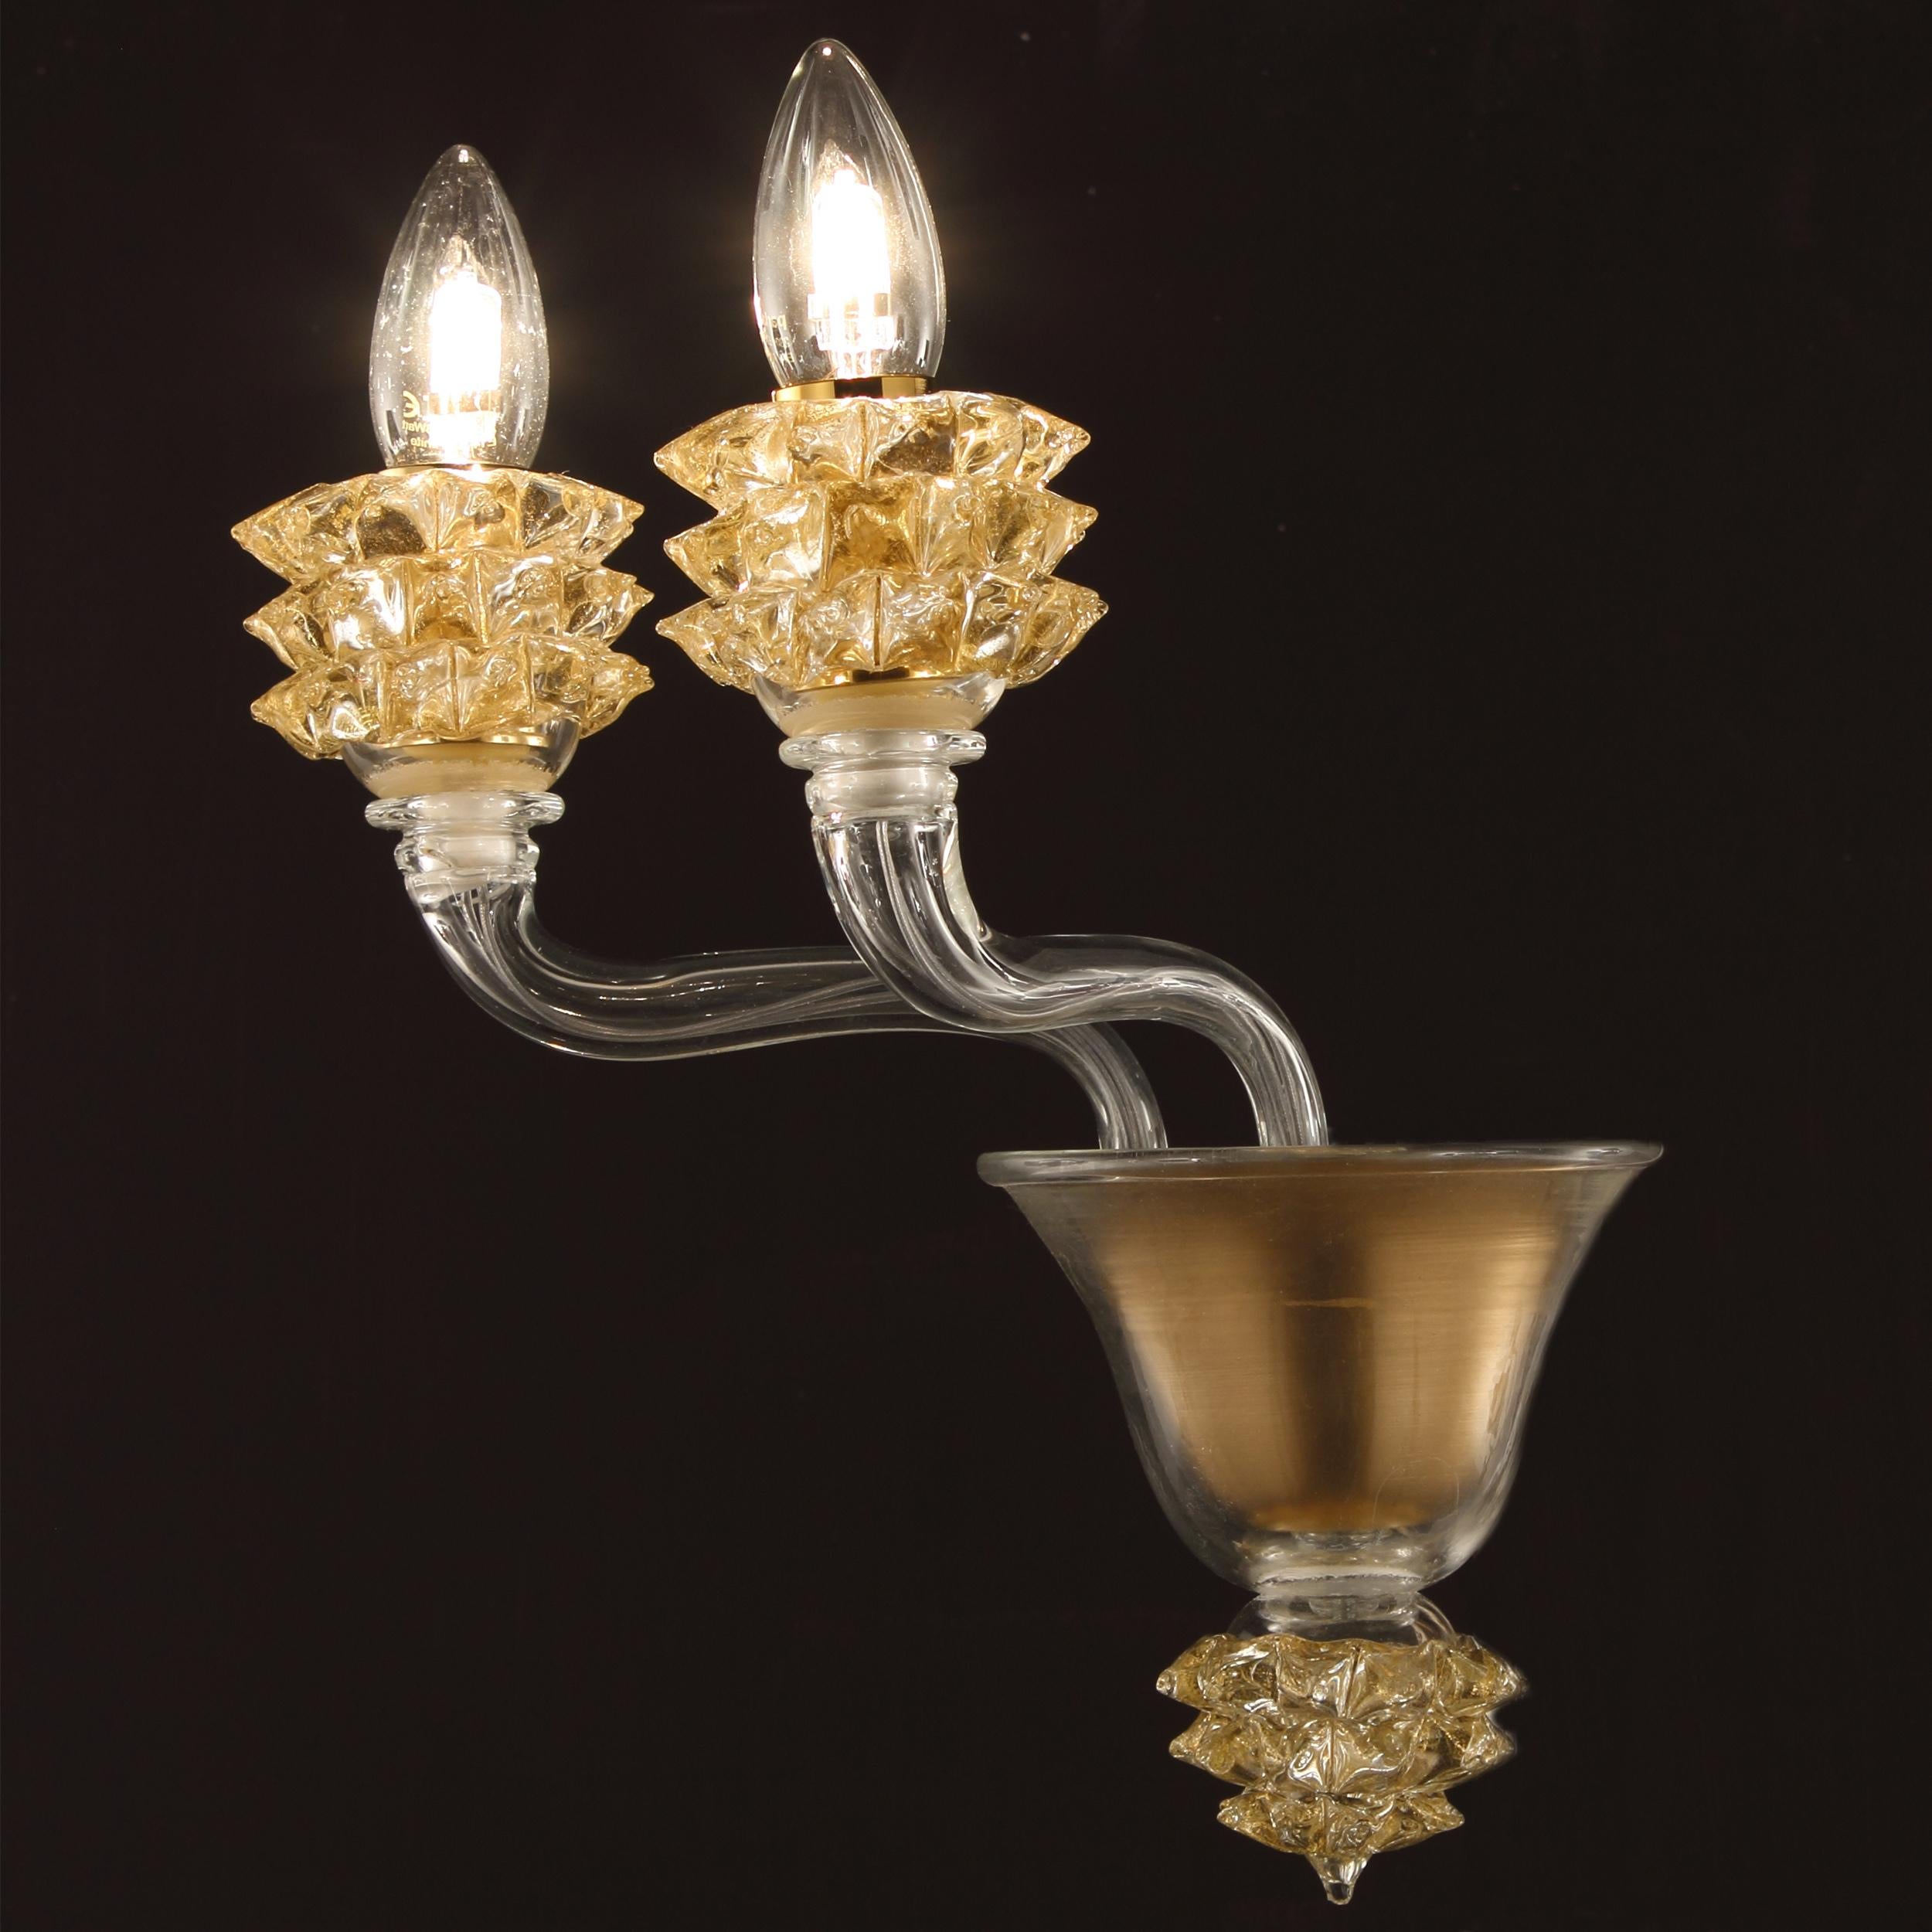 The Diamante sconce with 2 arms in clear encased Murano glass and gold details is a well proportioned product.
The glass of the arms is smooth. The standout elements of this sconce are the cups, which are created using a complex manufacturing